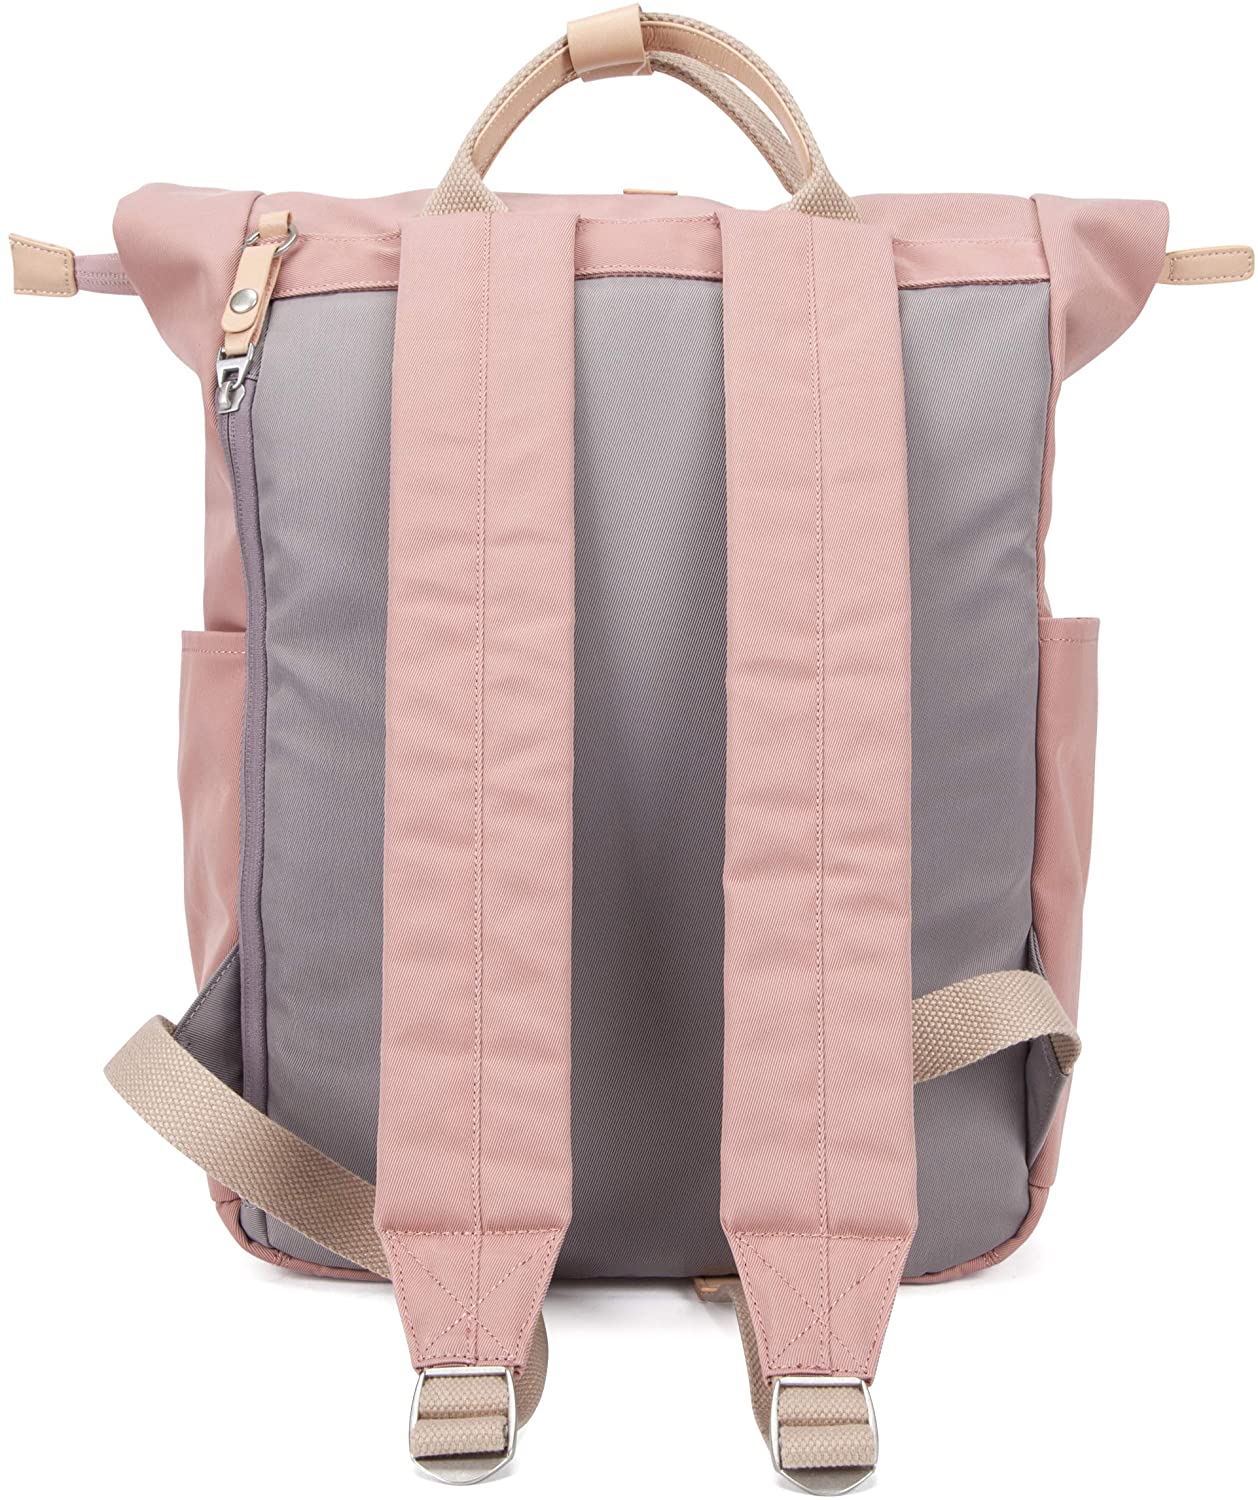 Canary Wharf Backpack - Pink with Grey - Seventeen London